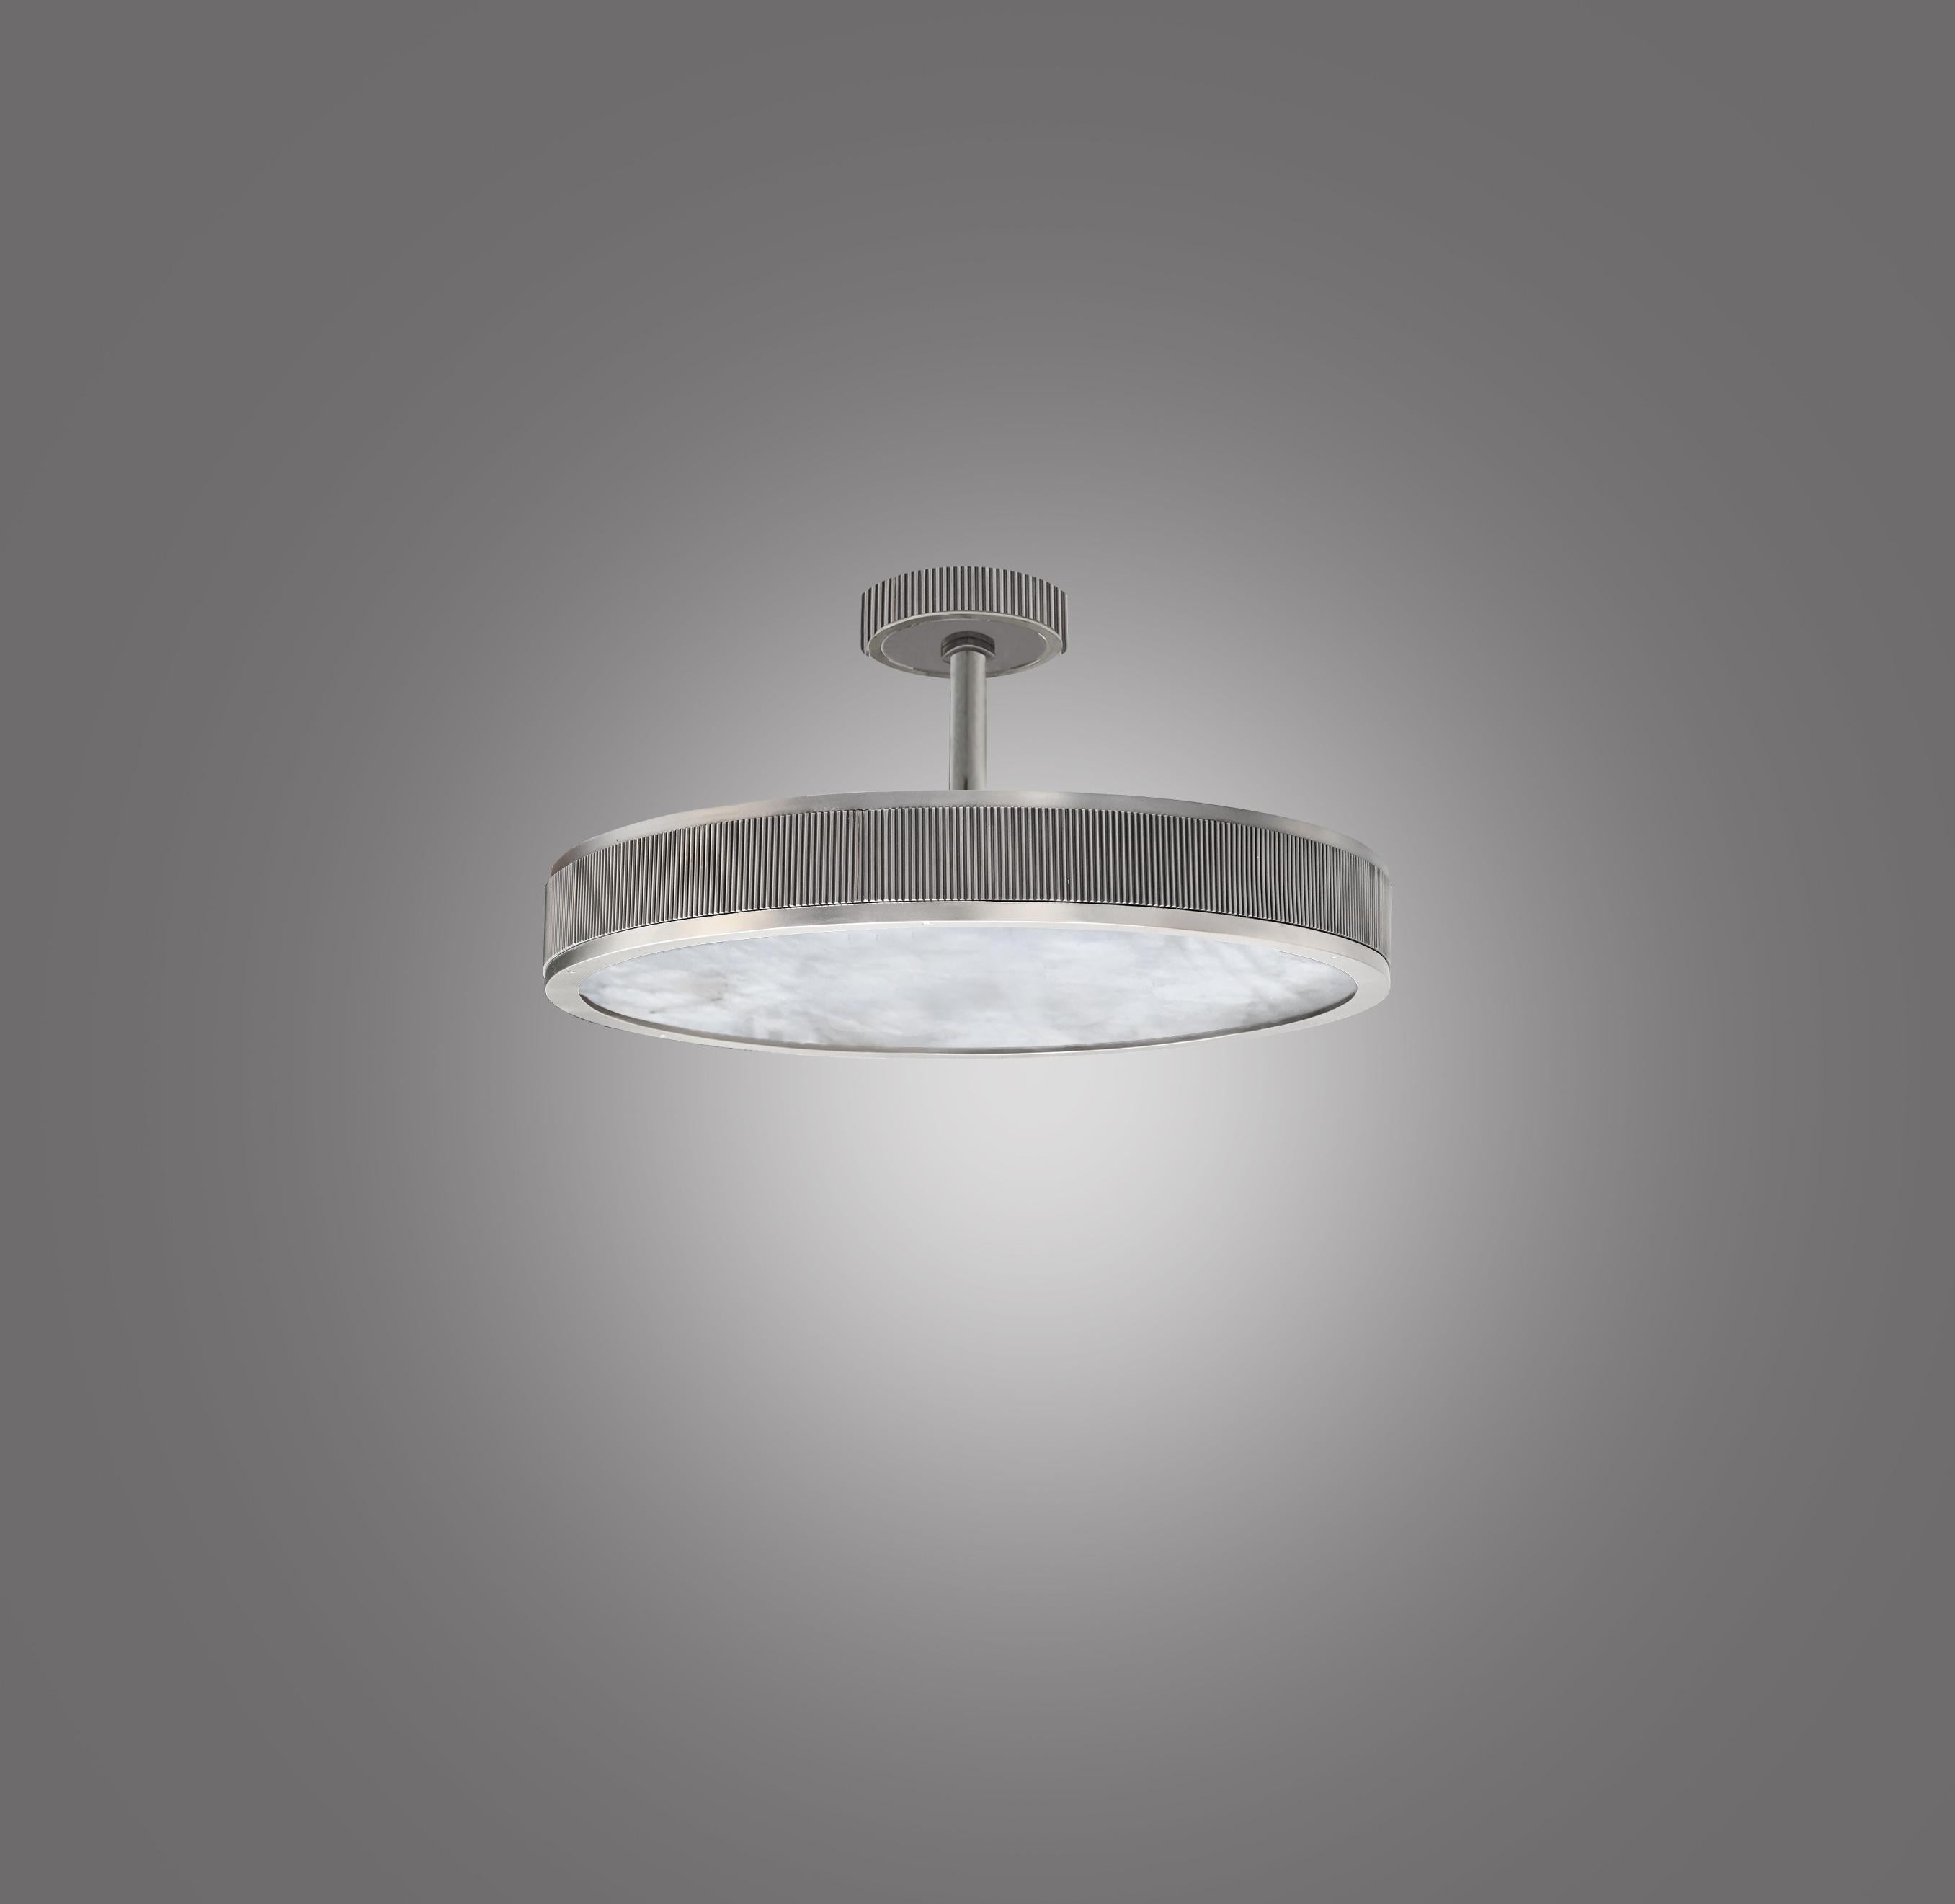 Large rock crystal semi flush mount with matte nickel plating frame. Created by Phoenix Gallery, NYC.
Custom size, quantity, and metal finish upon request.
Height can be adjustable.